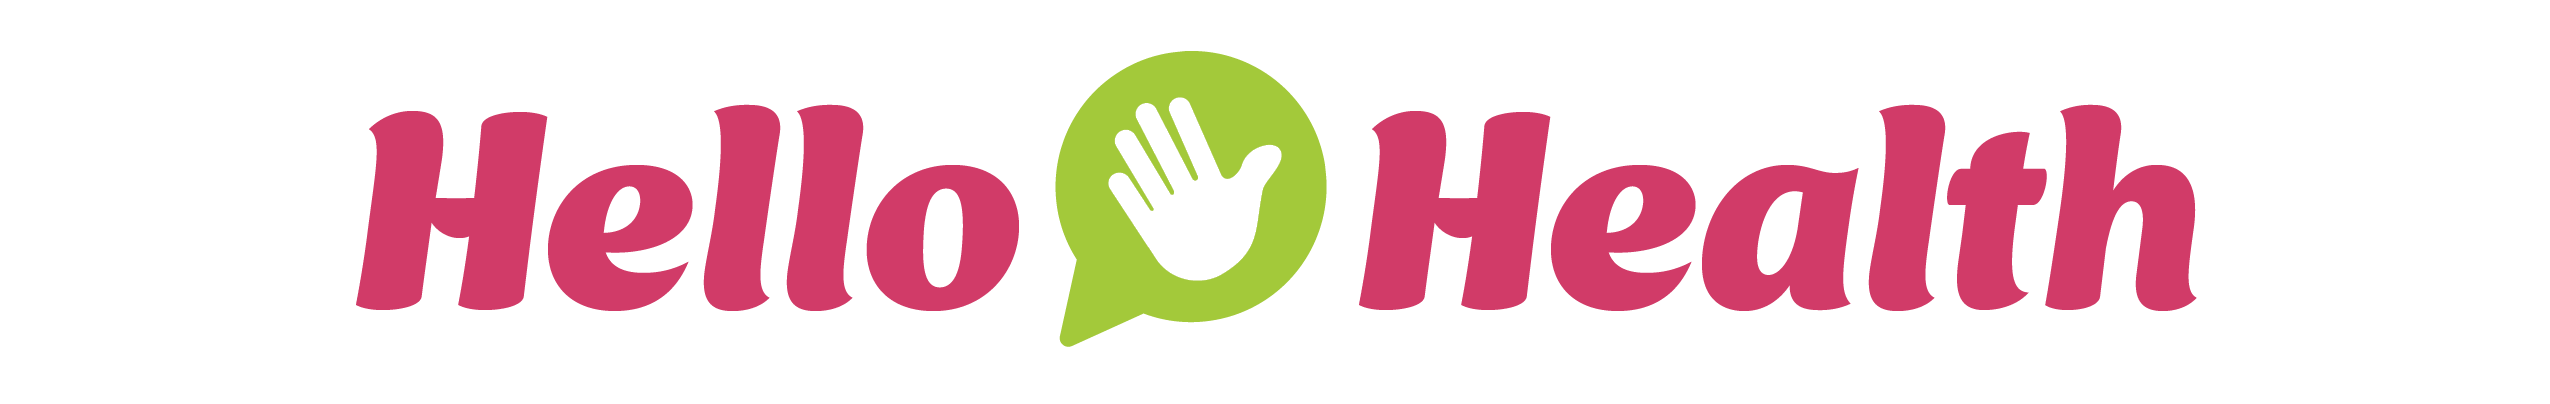 letters spelling out hello and health with a green speech bubble with a waving hand icon inside